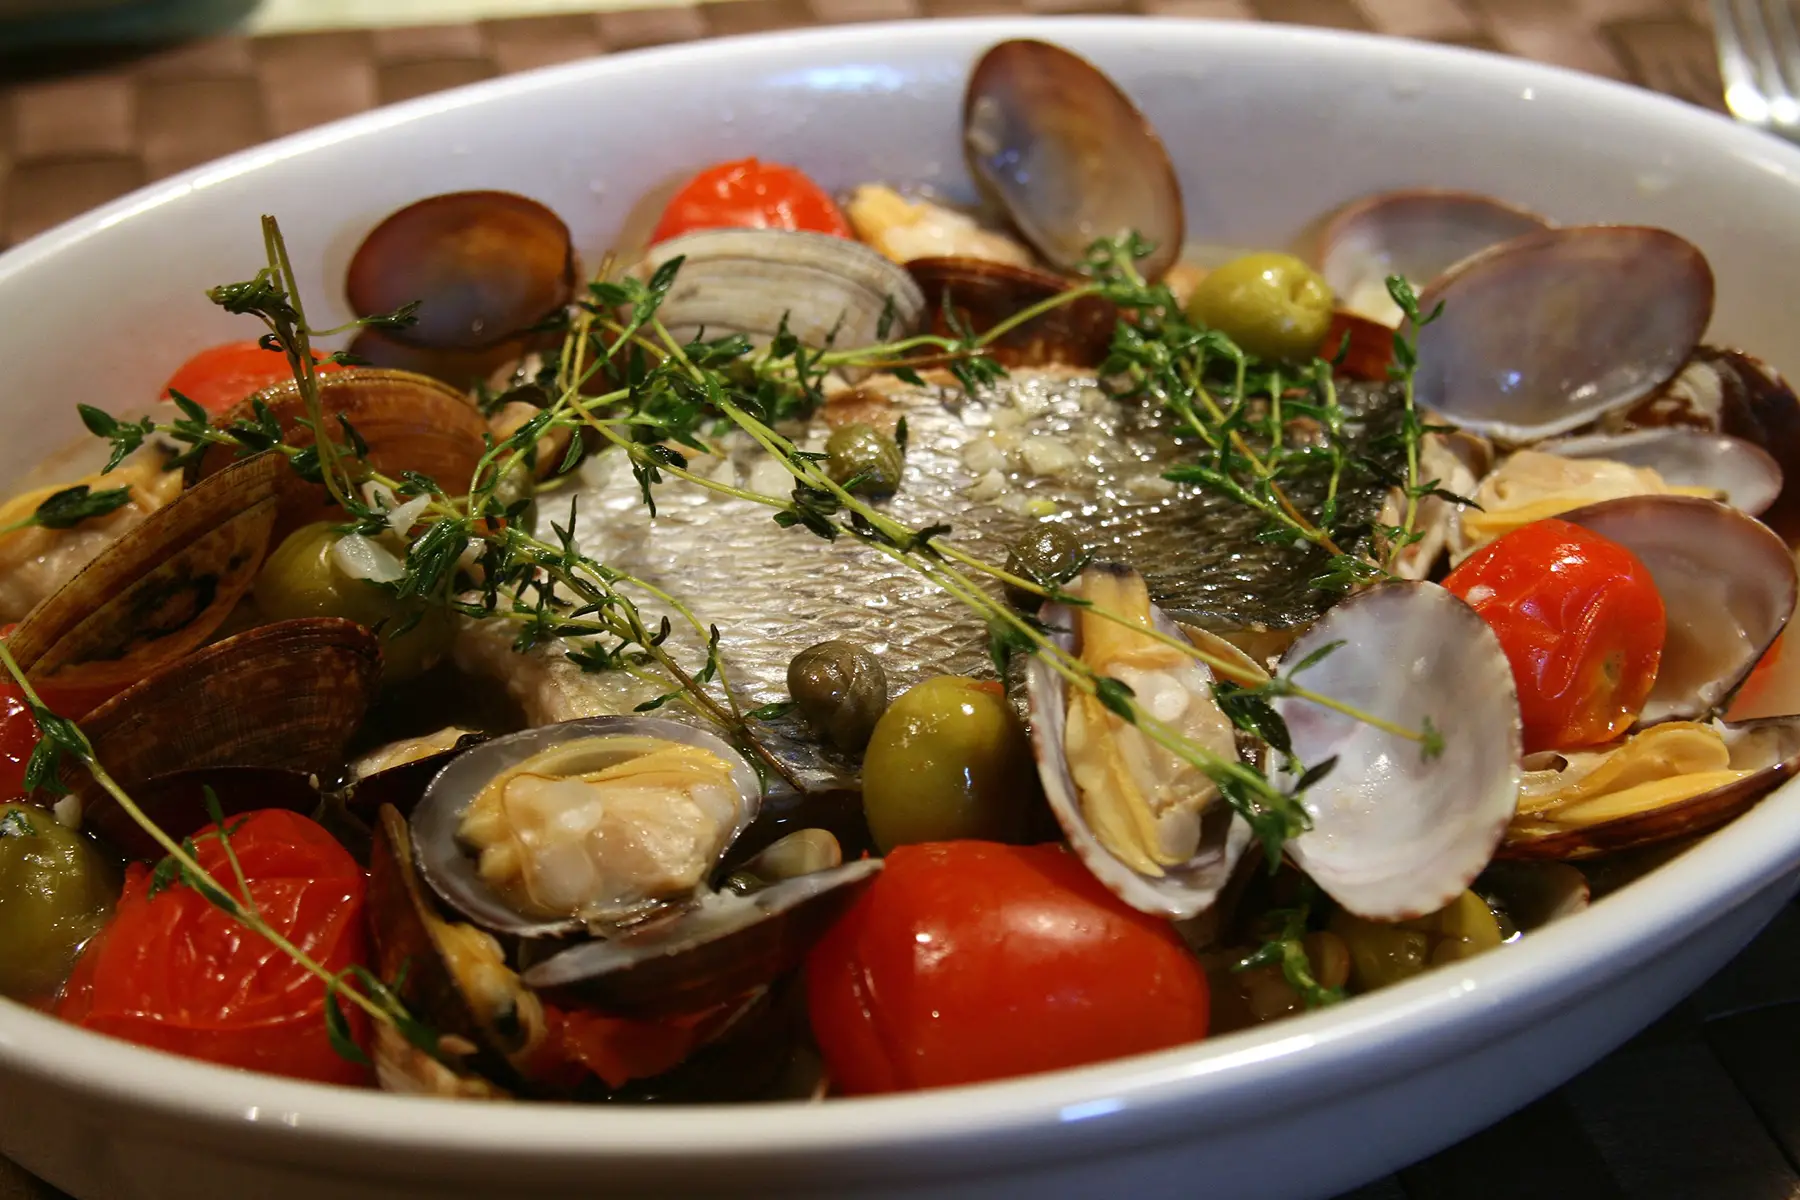 Acqua pazza – a piece of fish in a dish surrounded by tomatoes, olives, mussels, and herbs